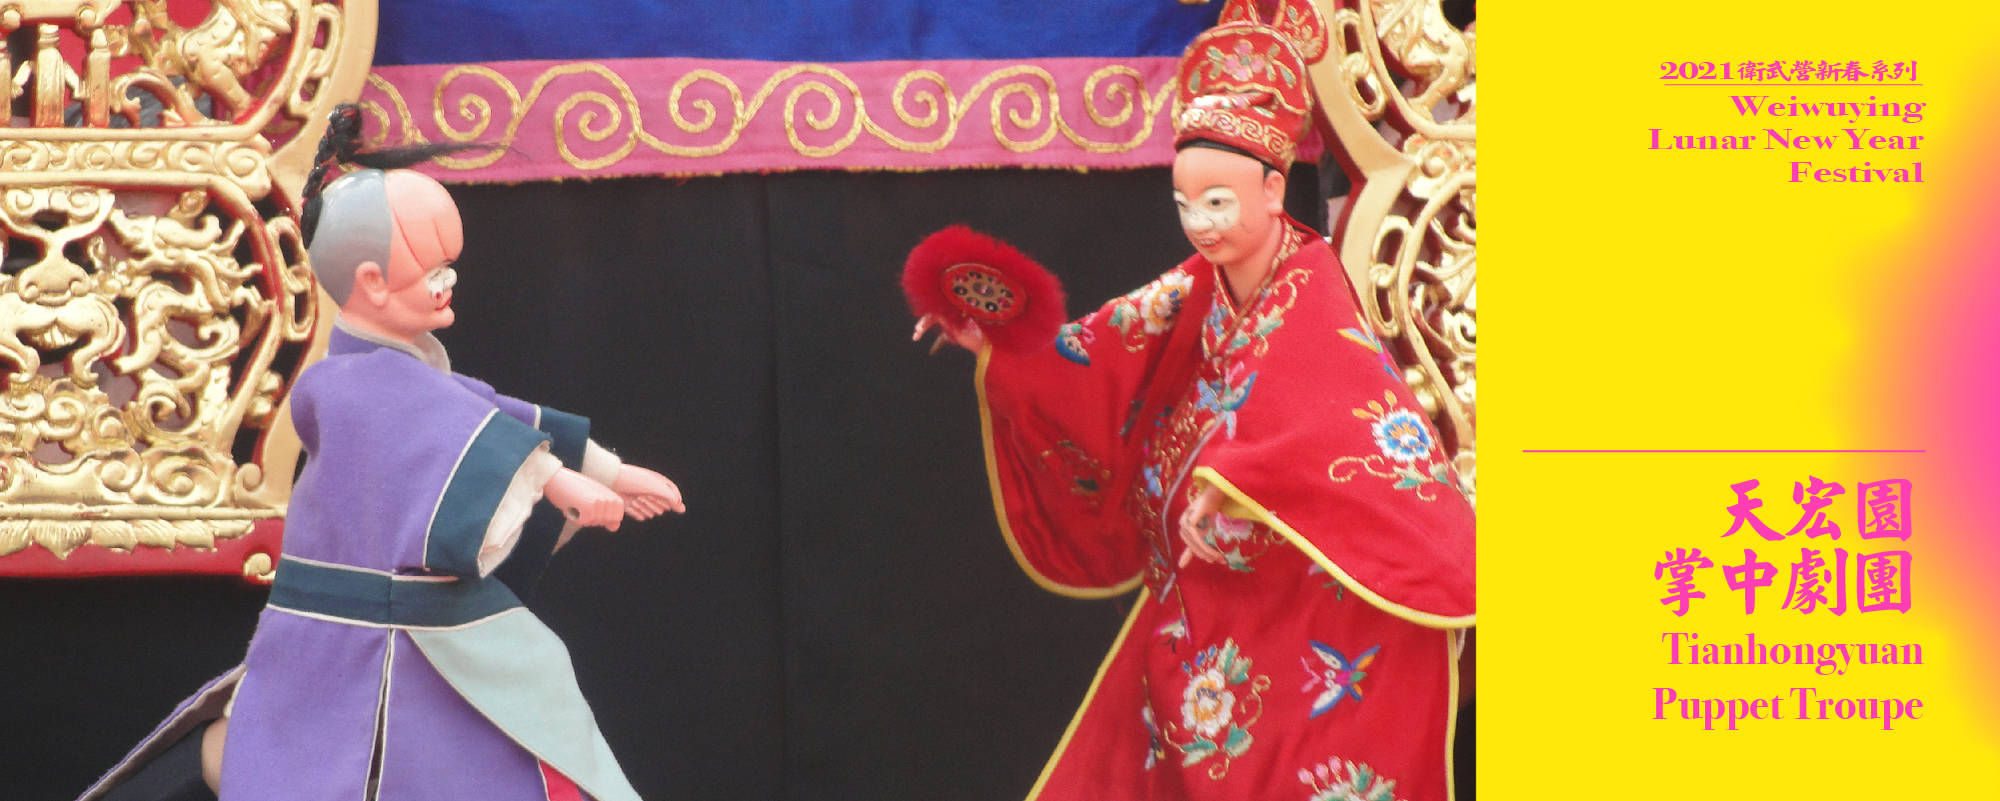 【2021 Weiwuying Lunar New Year Festival】Tianhongyuan Puppet Troupe - Happy celebration of reunion in Spring festival